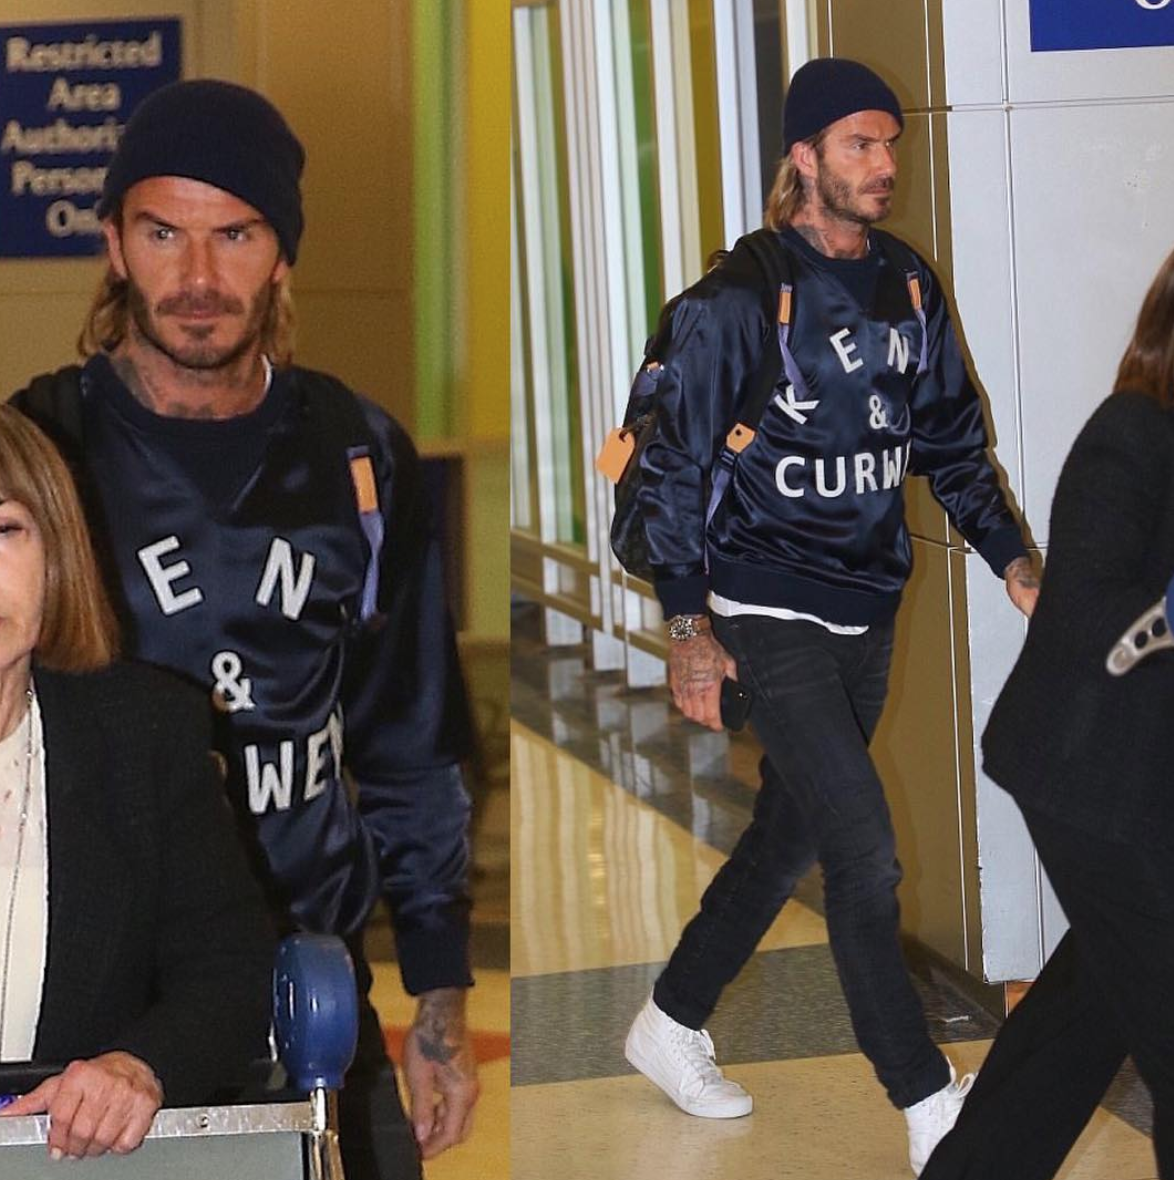 SPOTTED: David Beckham In Kent & Curwen Jacket And Louis Vuitton Sneakers –  PAUSE Online